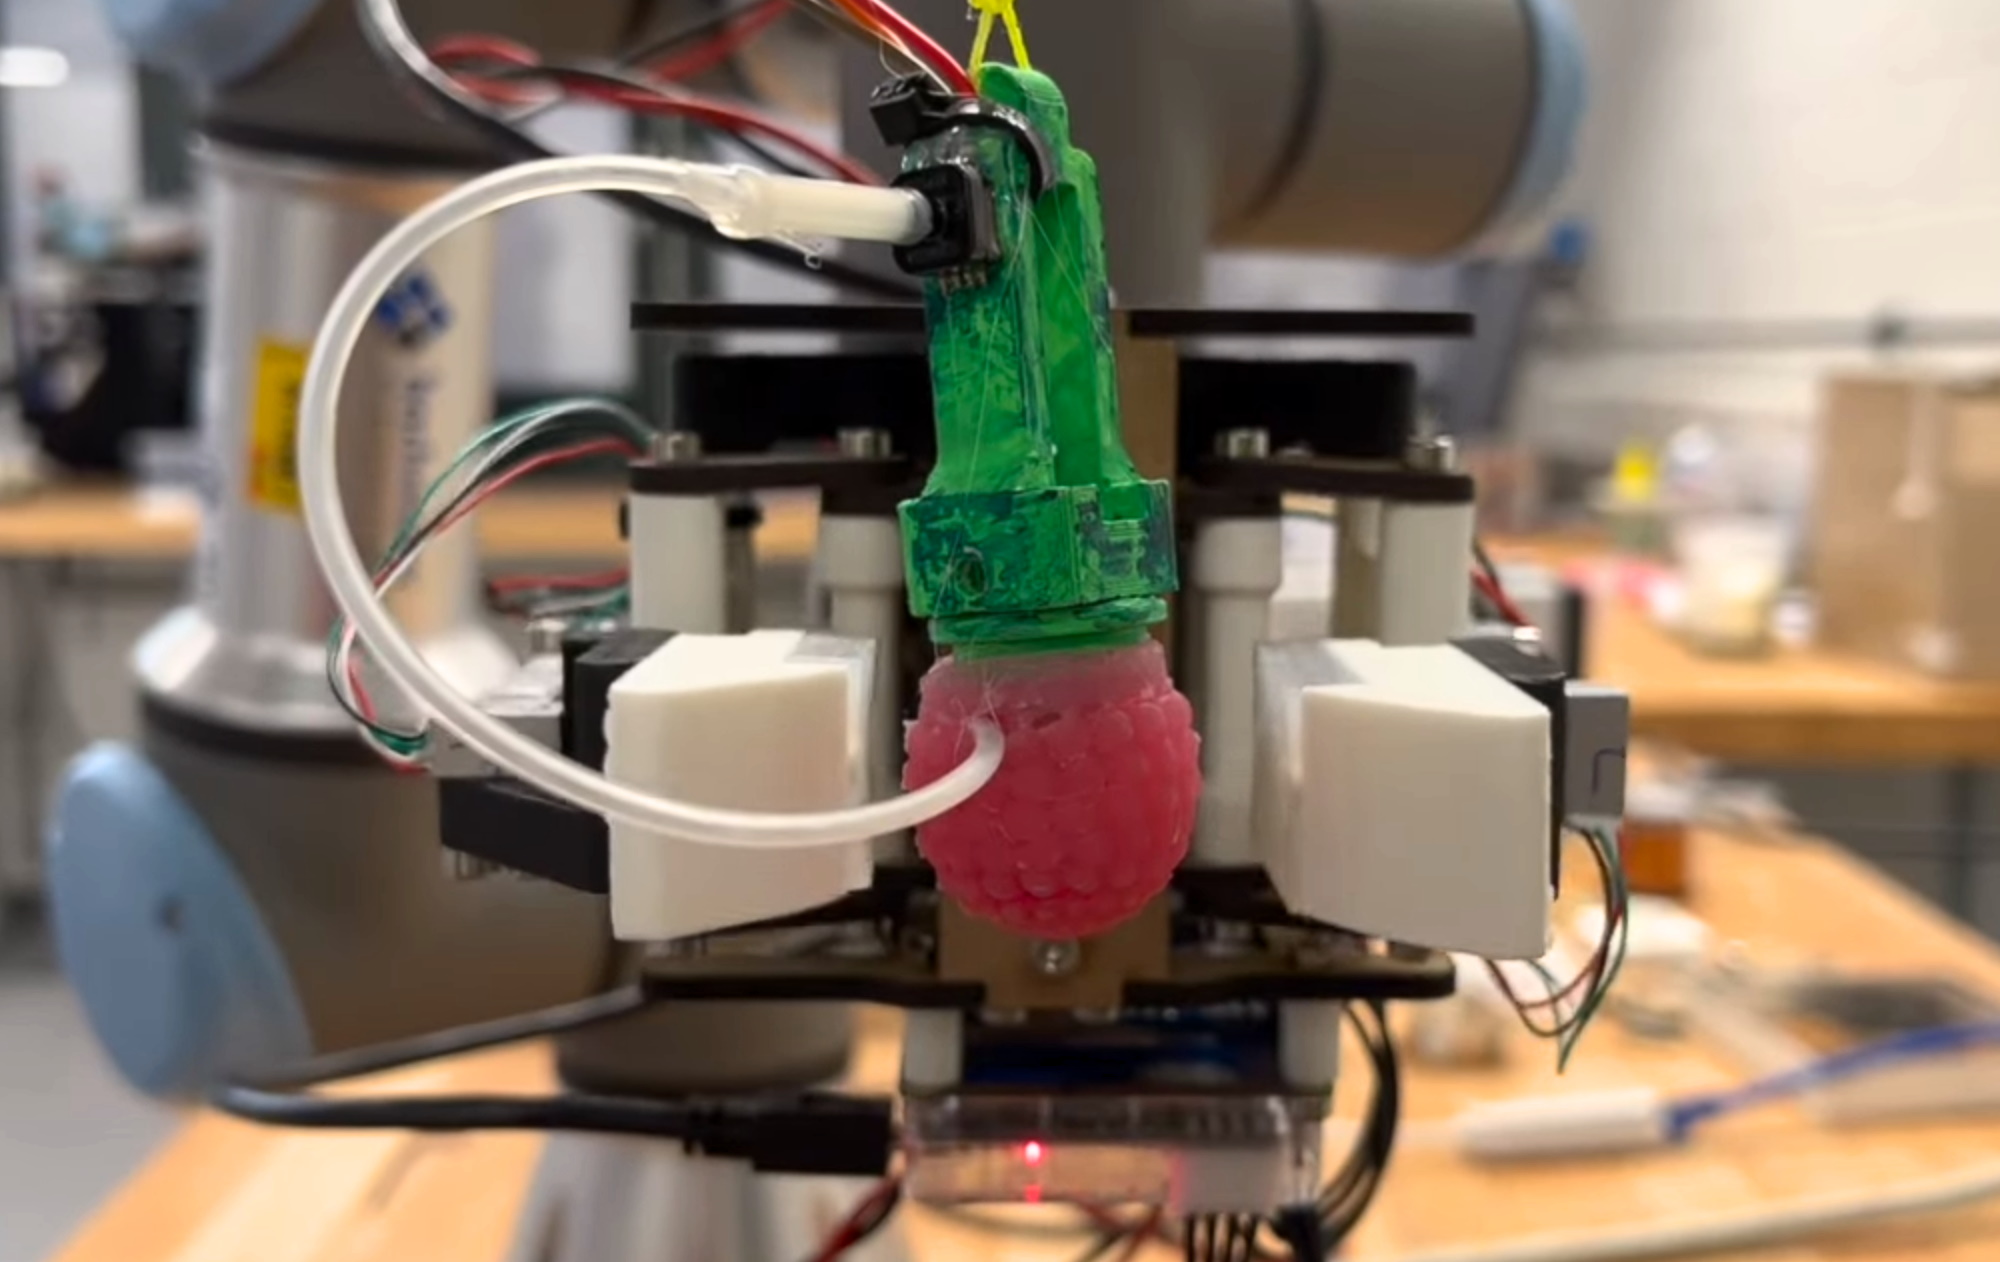 Close-up image of a silicone raspberry replica held by a robotic arm.